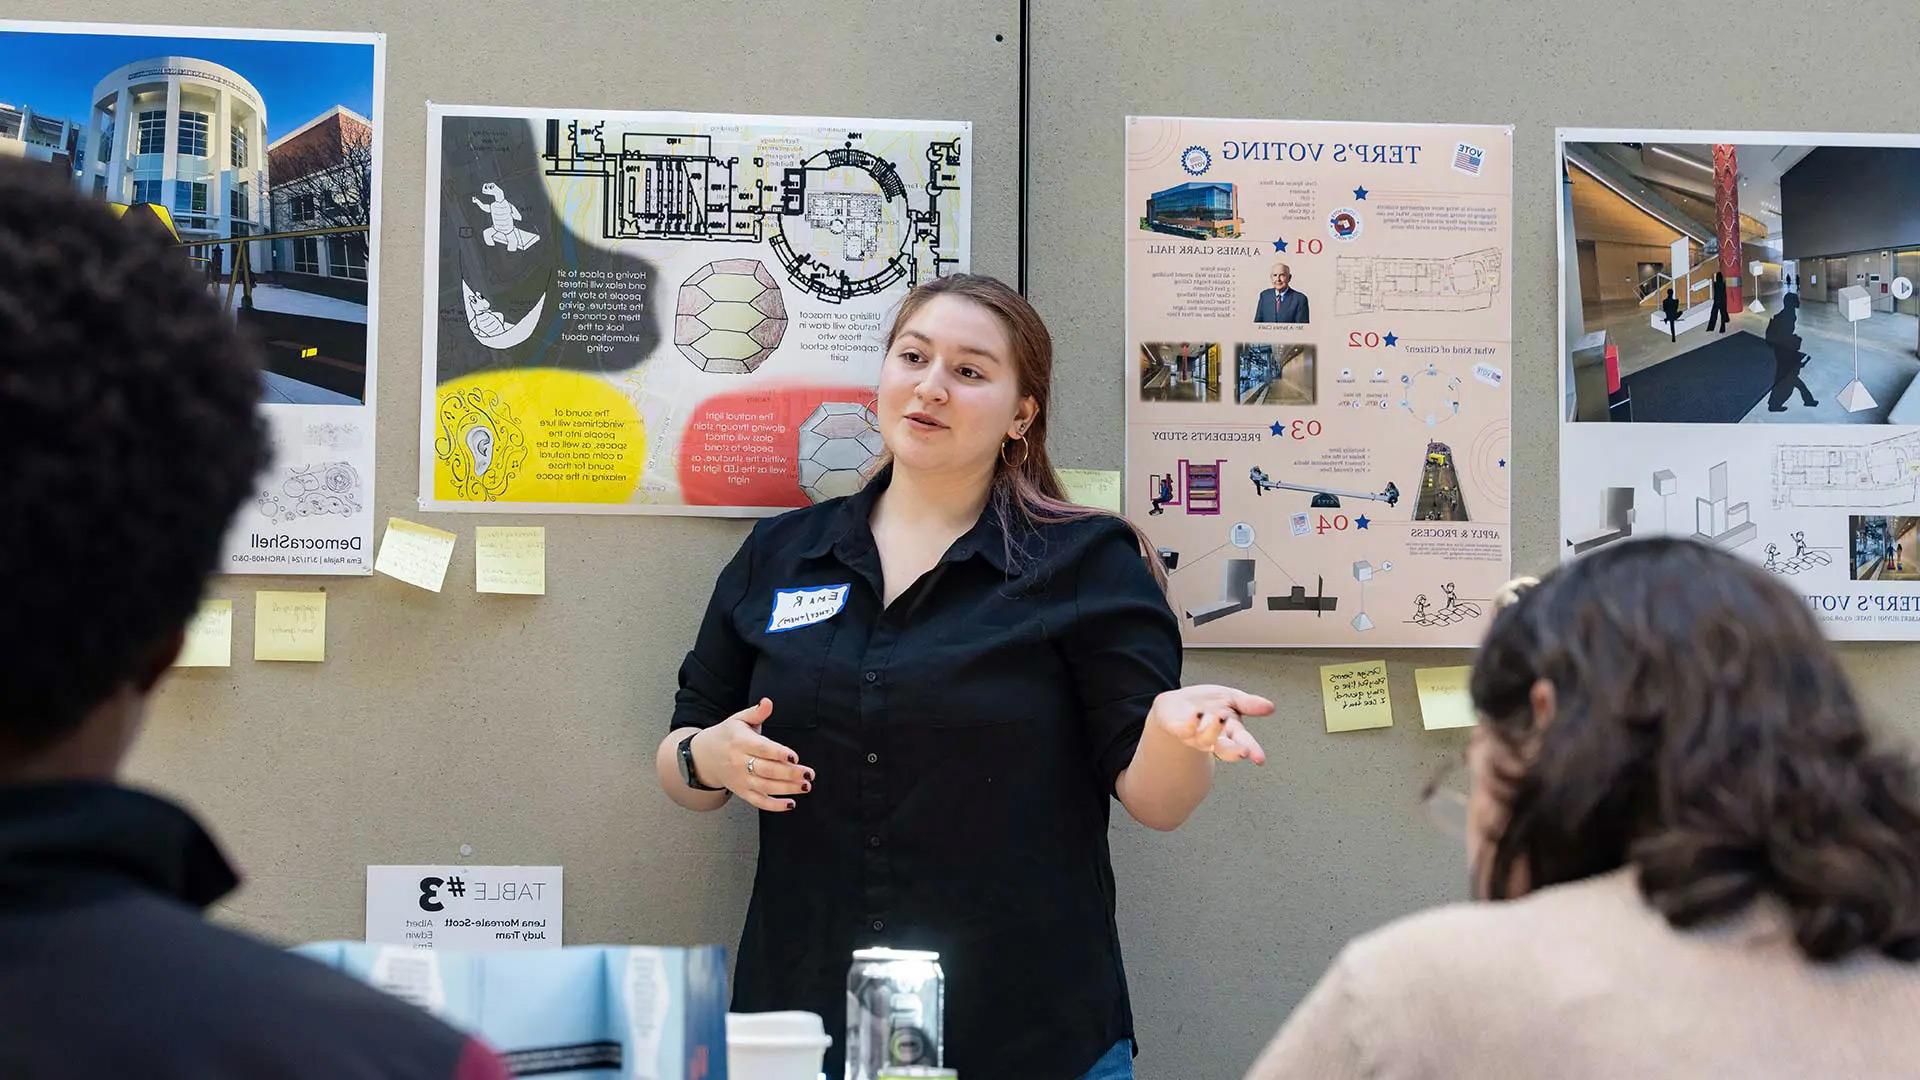 Architecture major and creative placemaking minor Ema Rajala '25 shares their proposal in a new class called "Design and Democracy," which brings together architecture, art, public policy and government and politics majors to develop pop-up installations to engage students about voting.